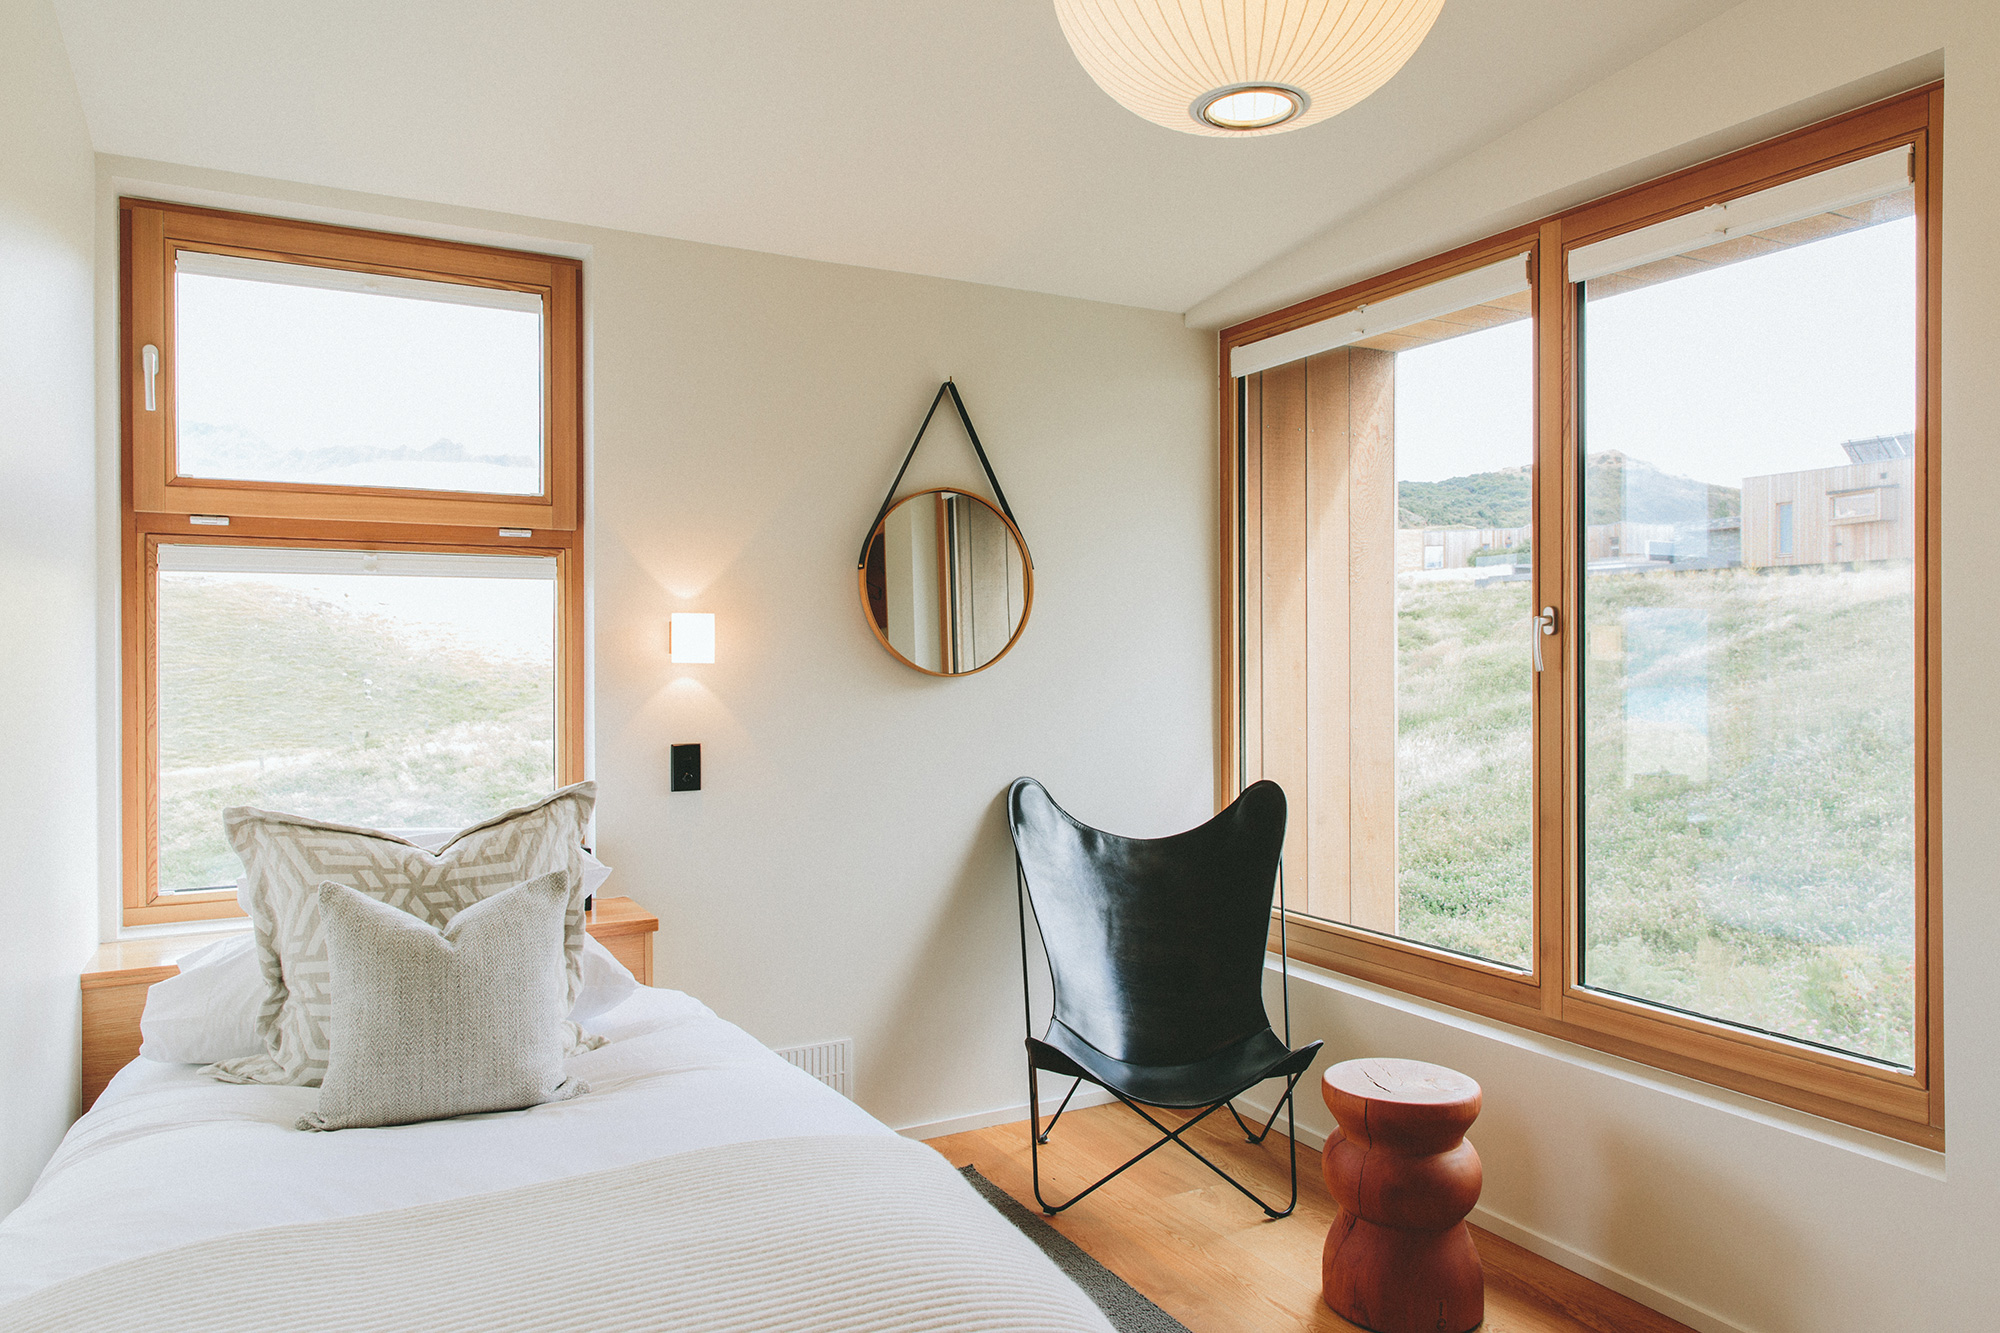  White bed with two gray pillows an windows looking out at a mountain view.  